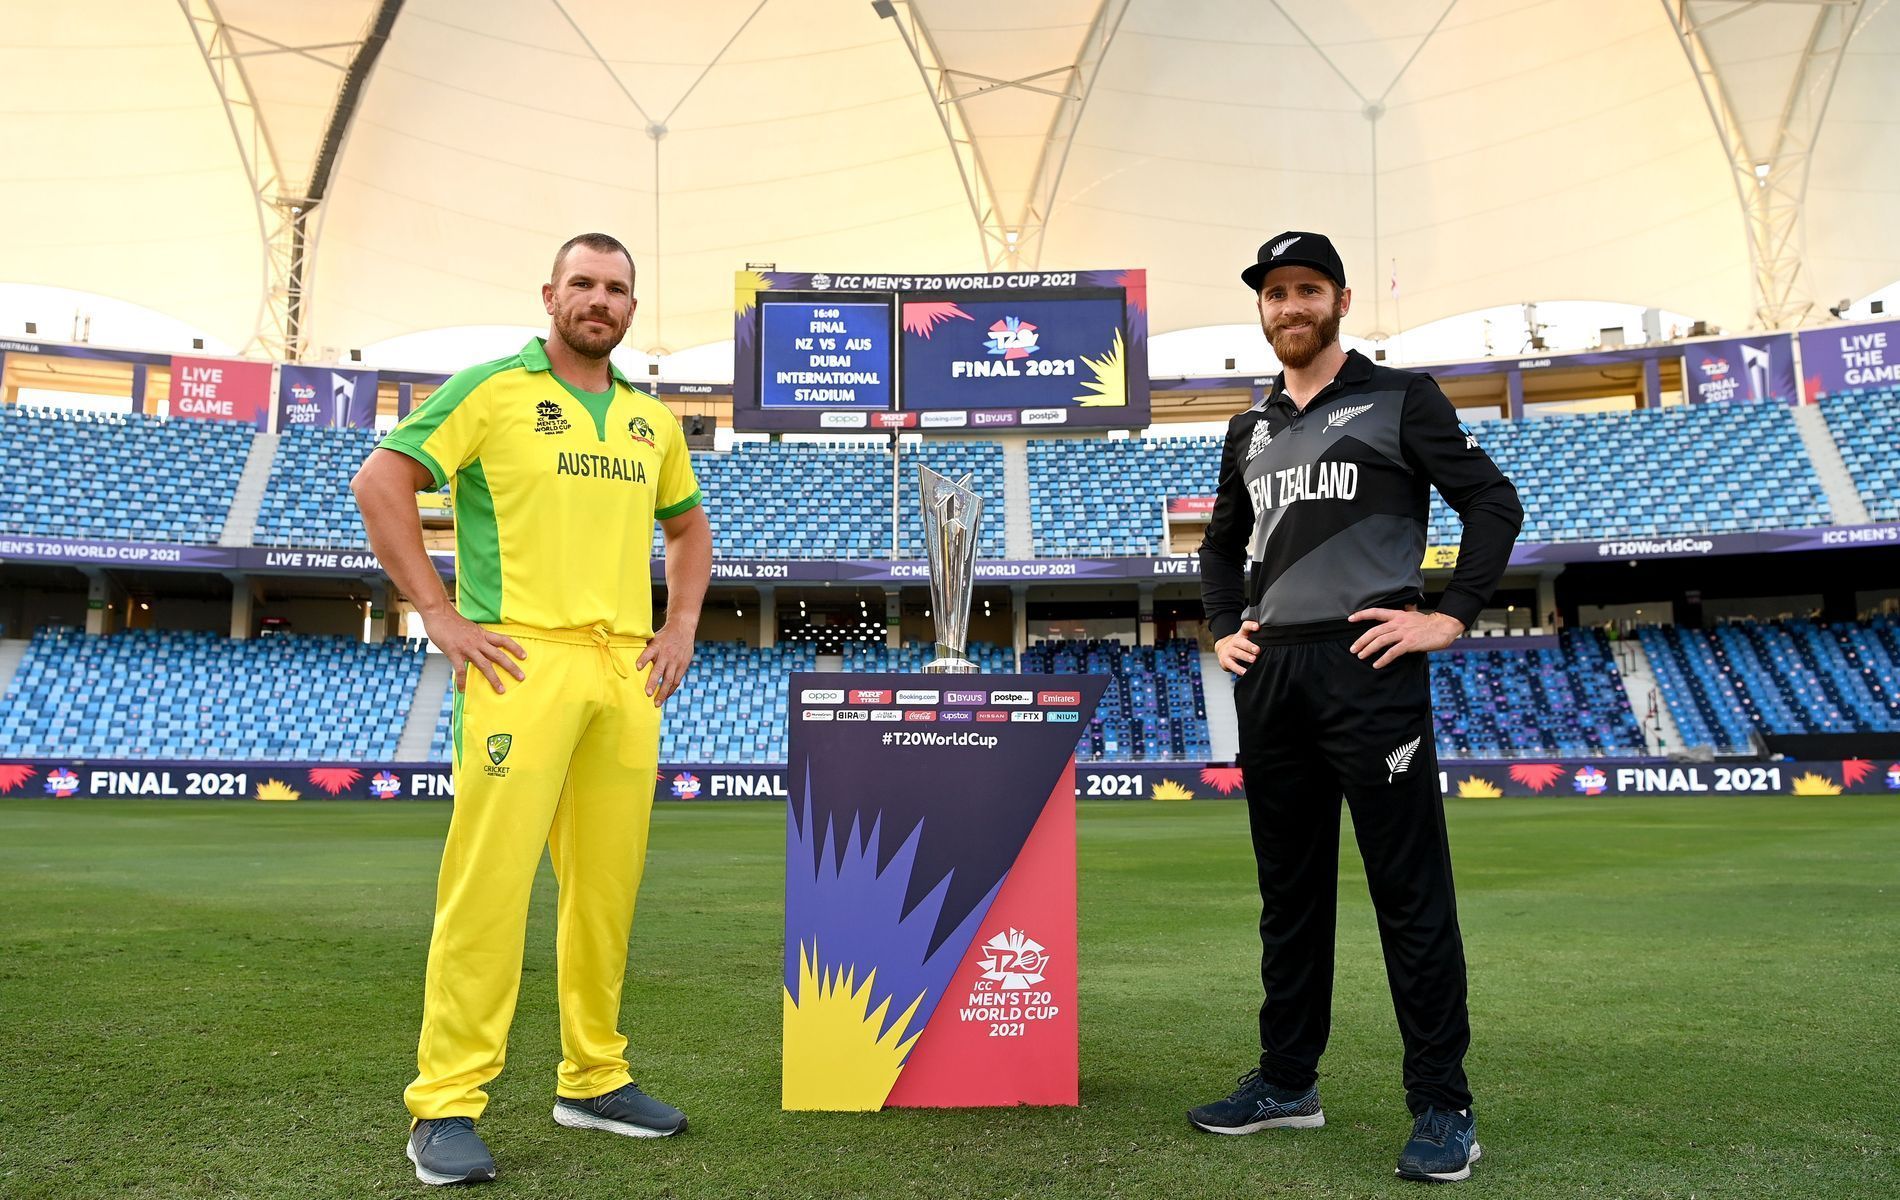 Australia and New Zealand will face off for the T20 World Cup trophy later today.